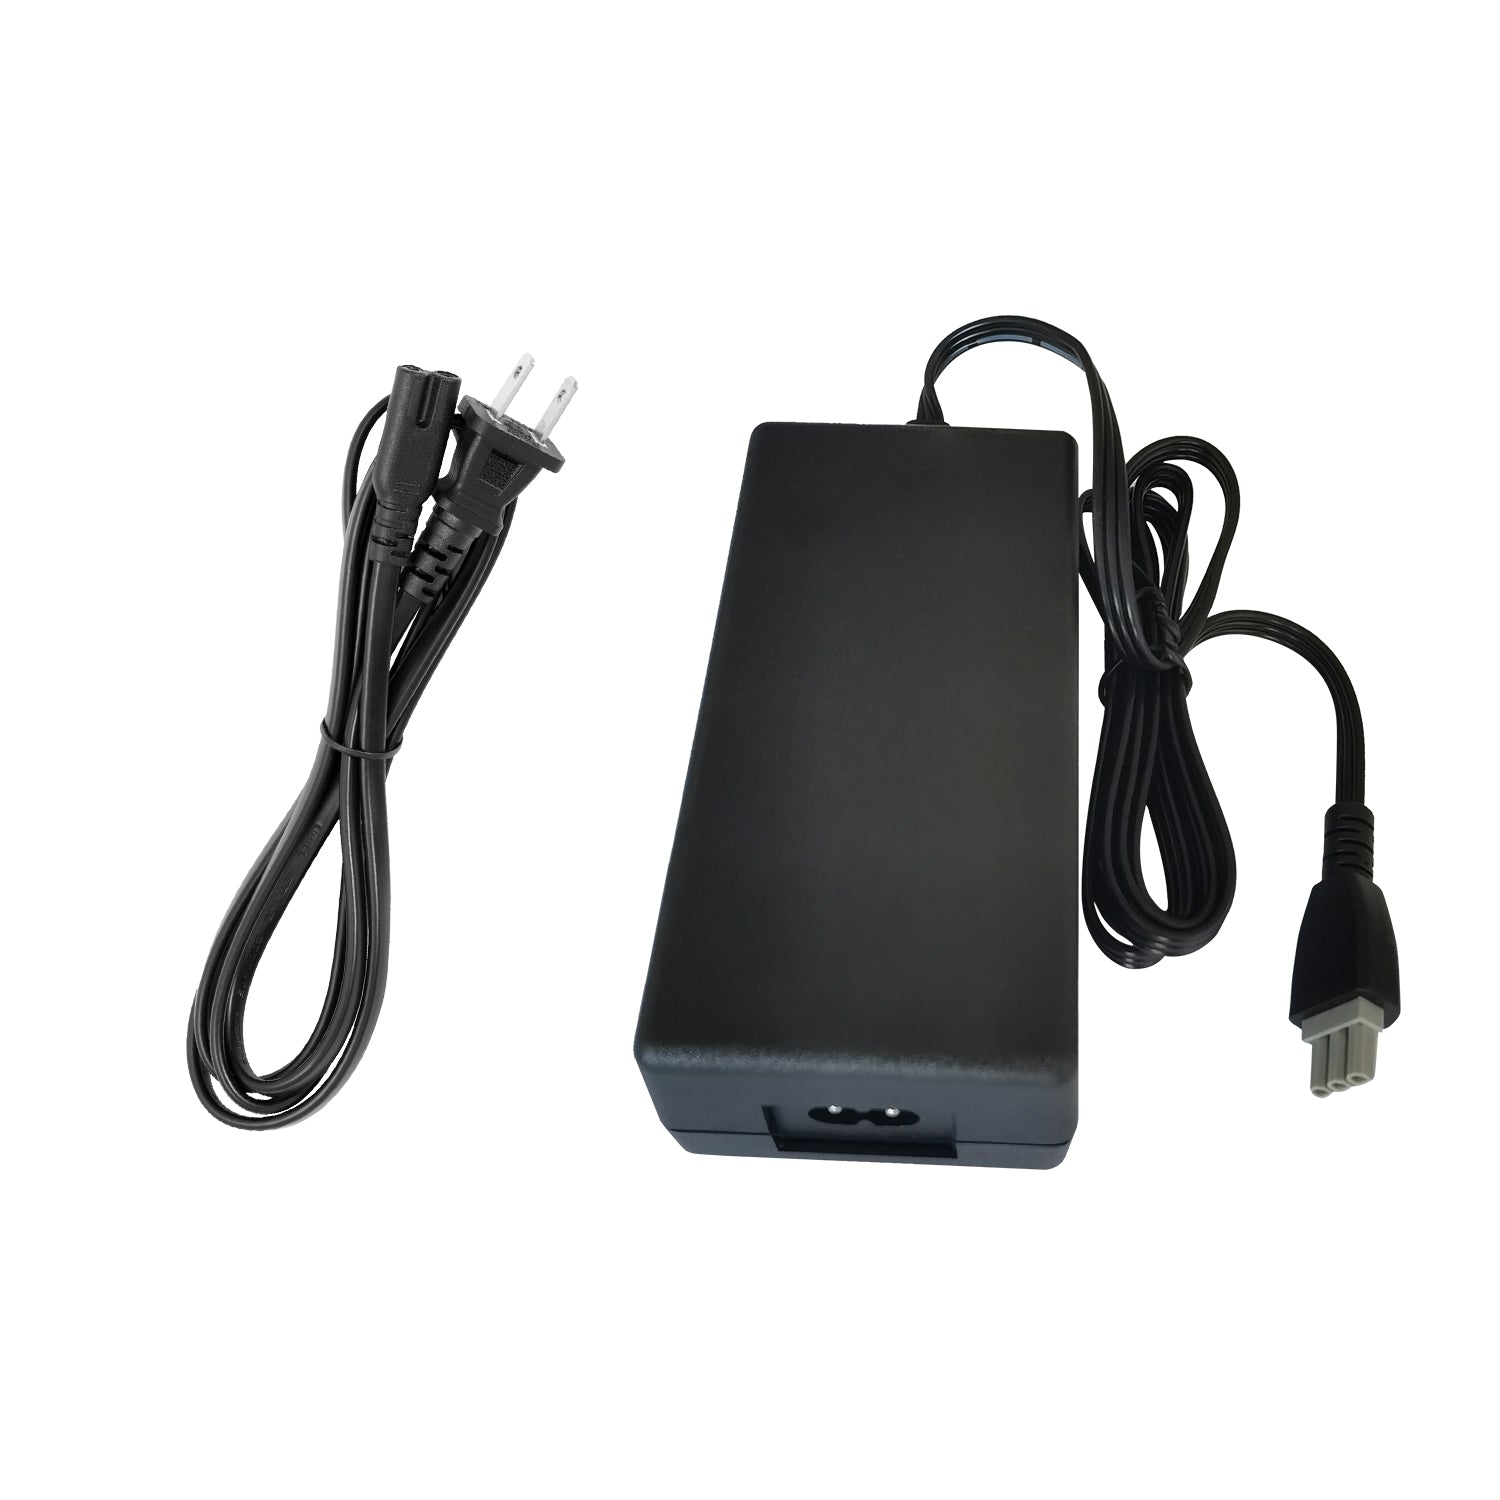 Power Adapter for hp psc 1315s Printer.